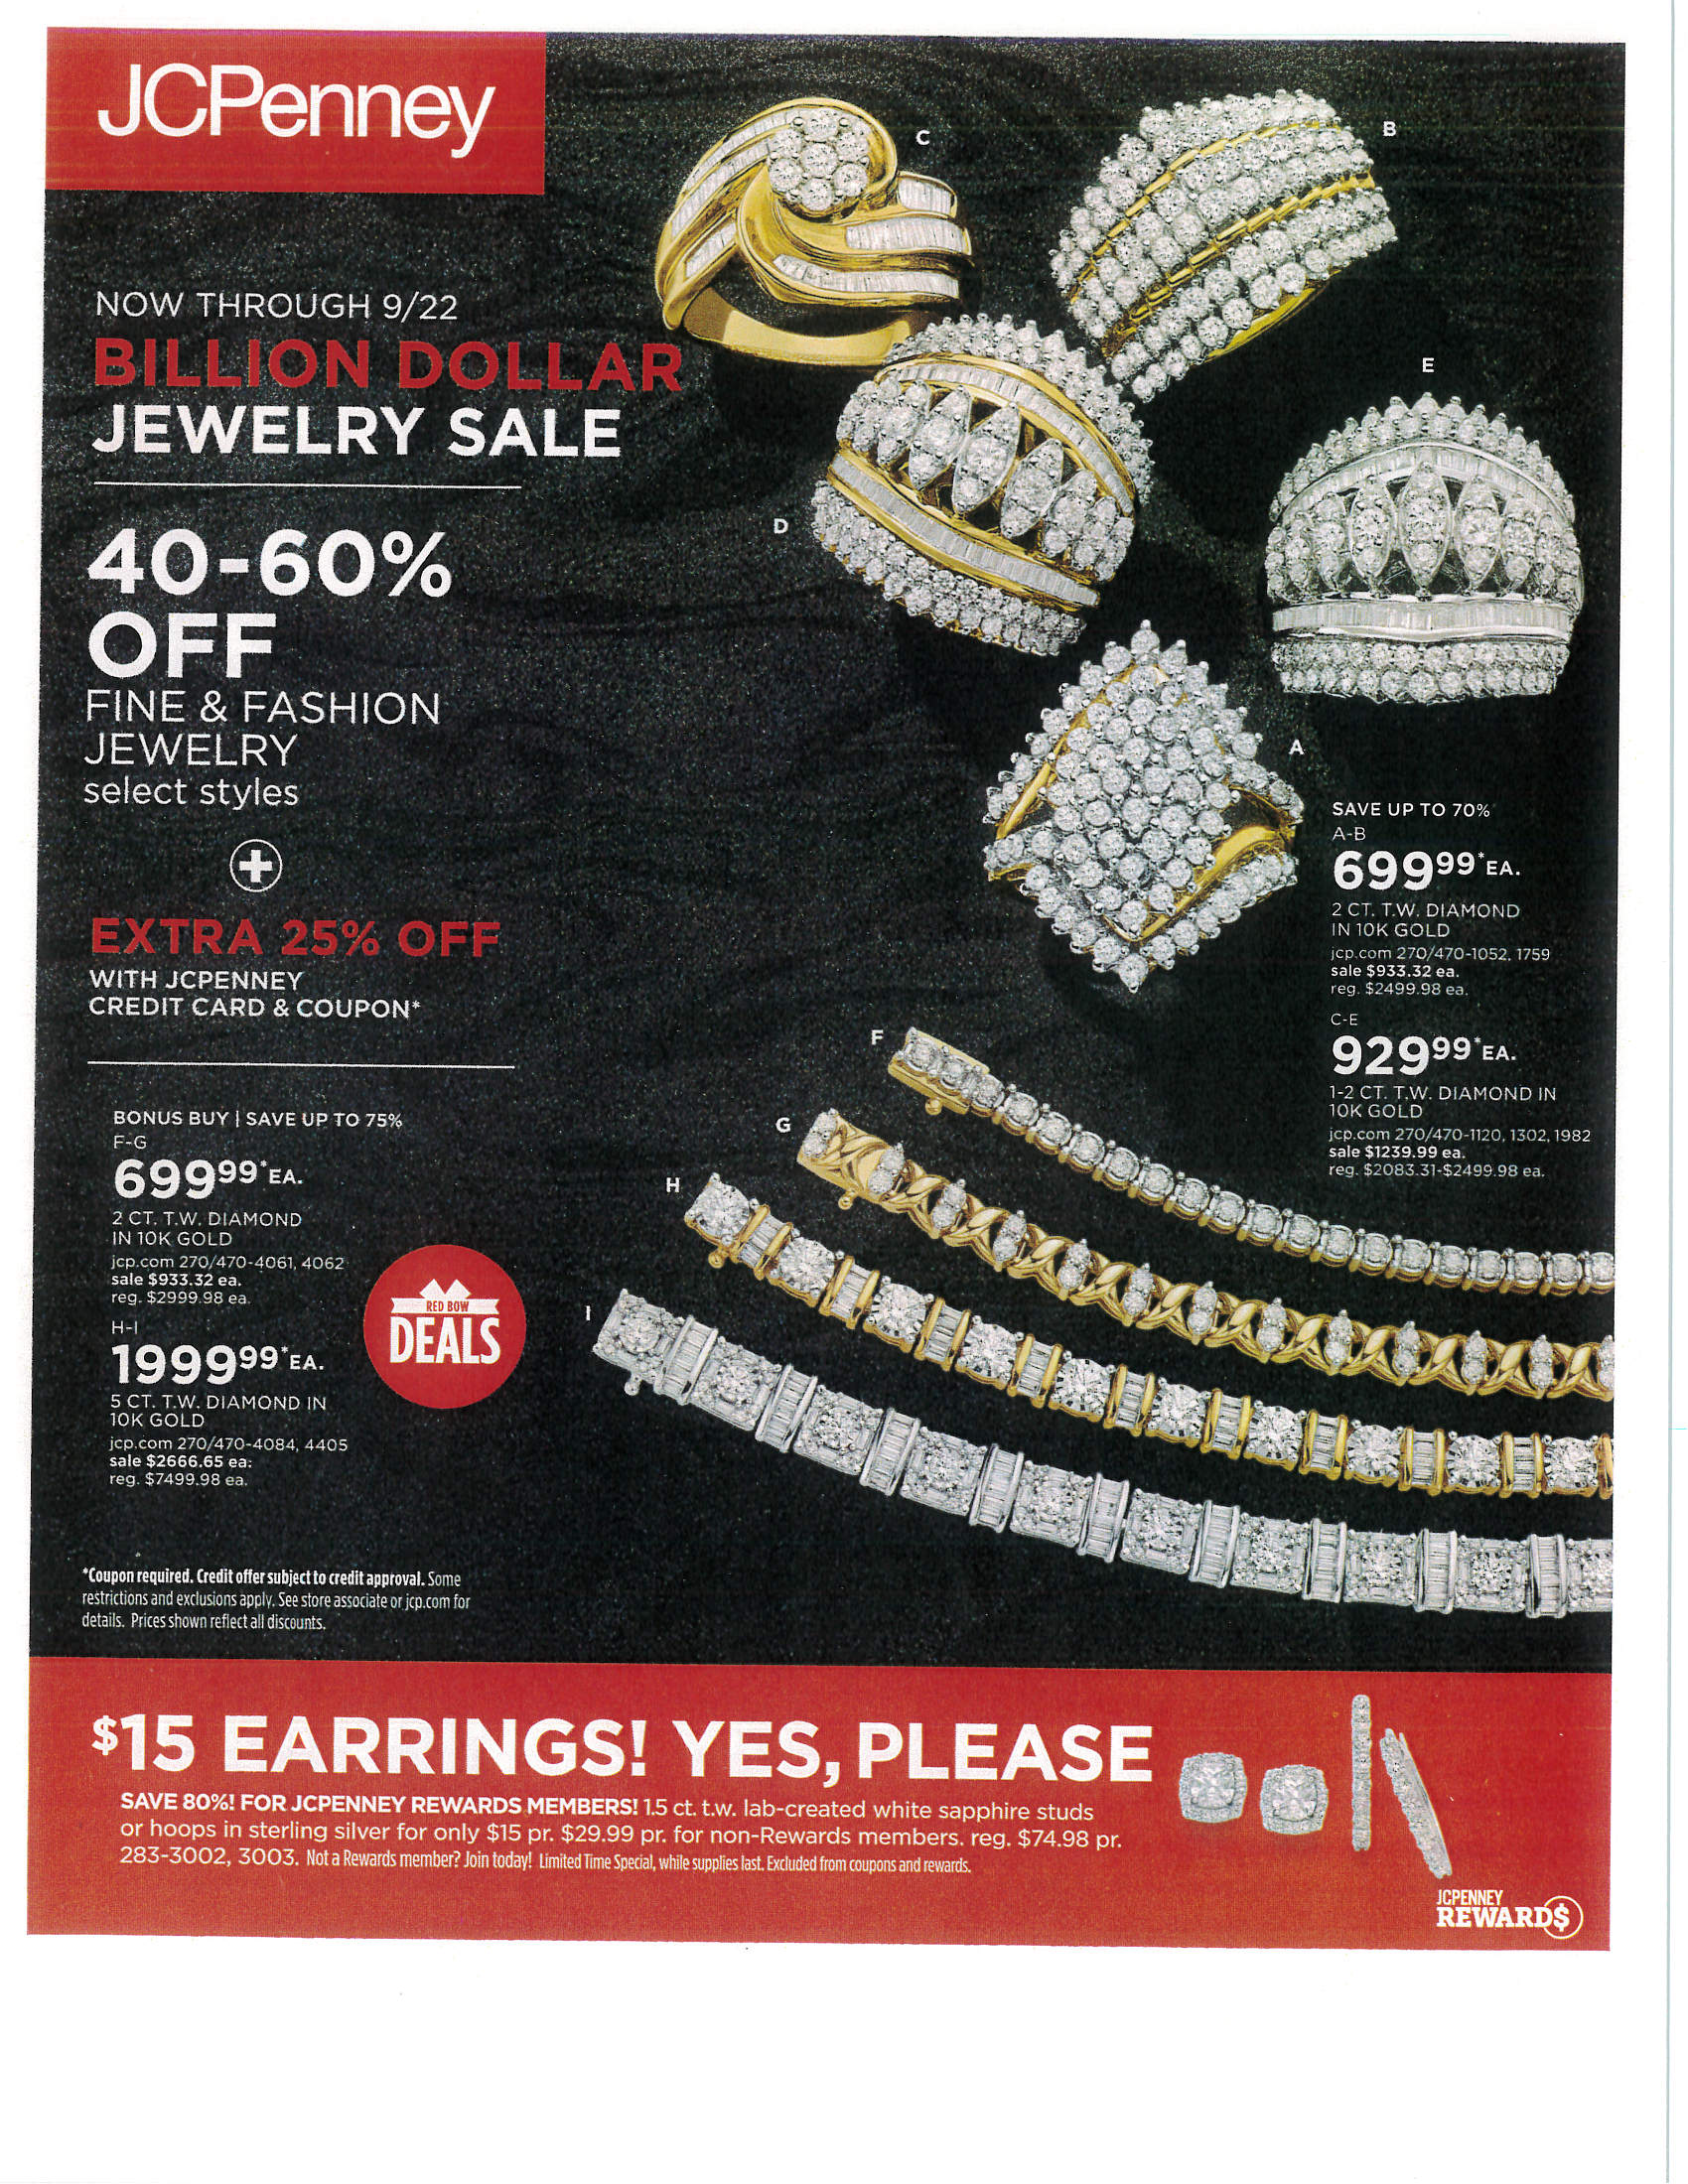 JCPenney Valentine's Day Jewelry Event! - Holyoke Mall